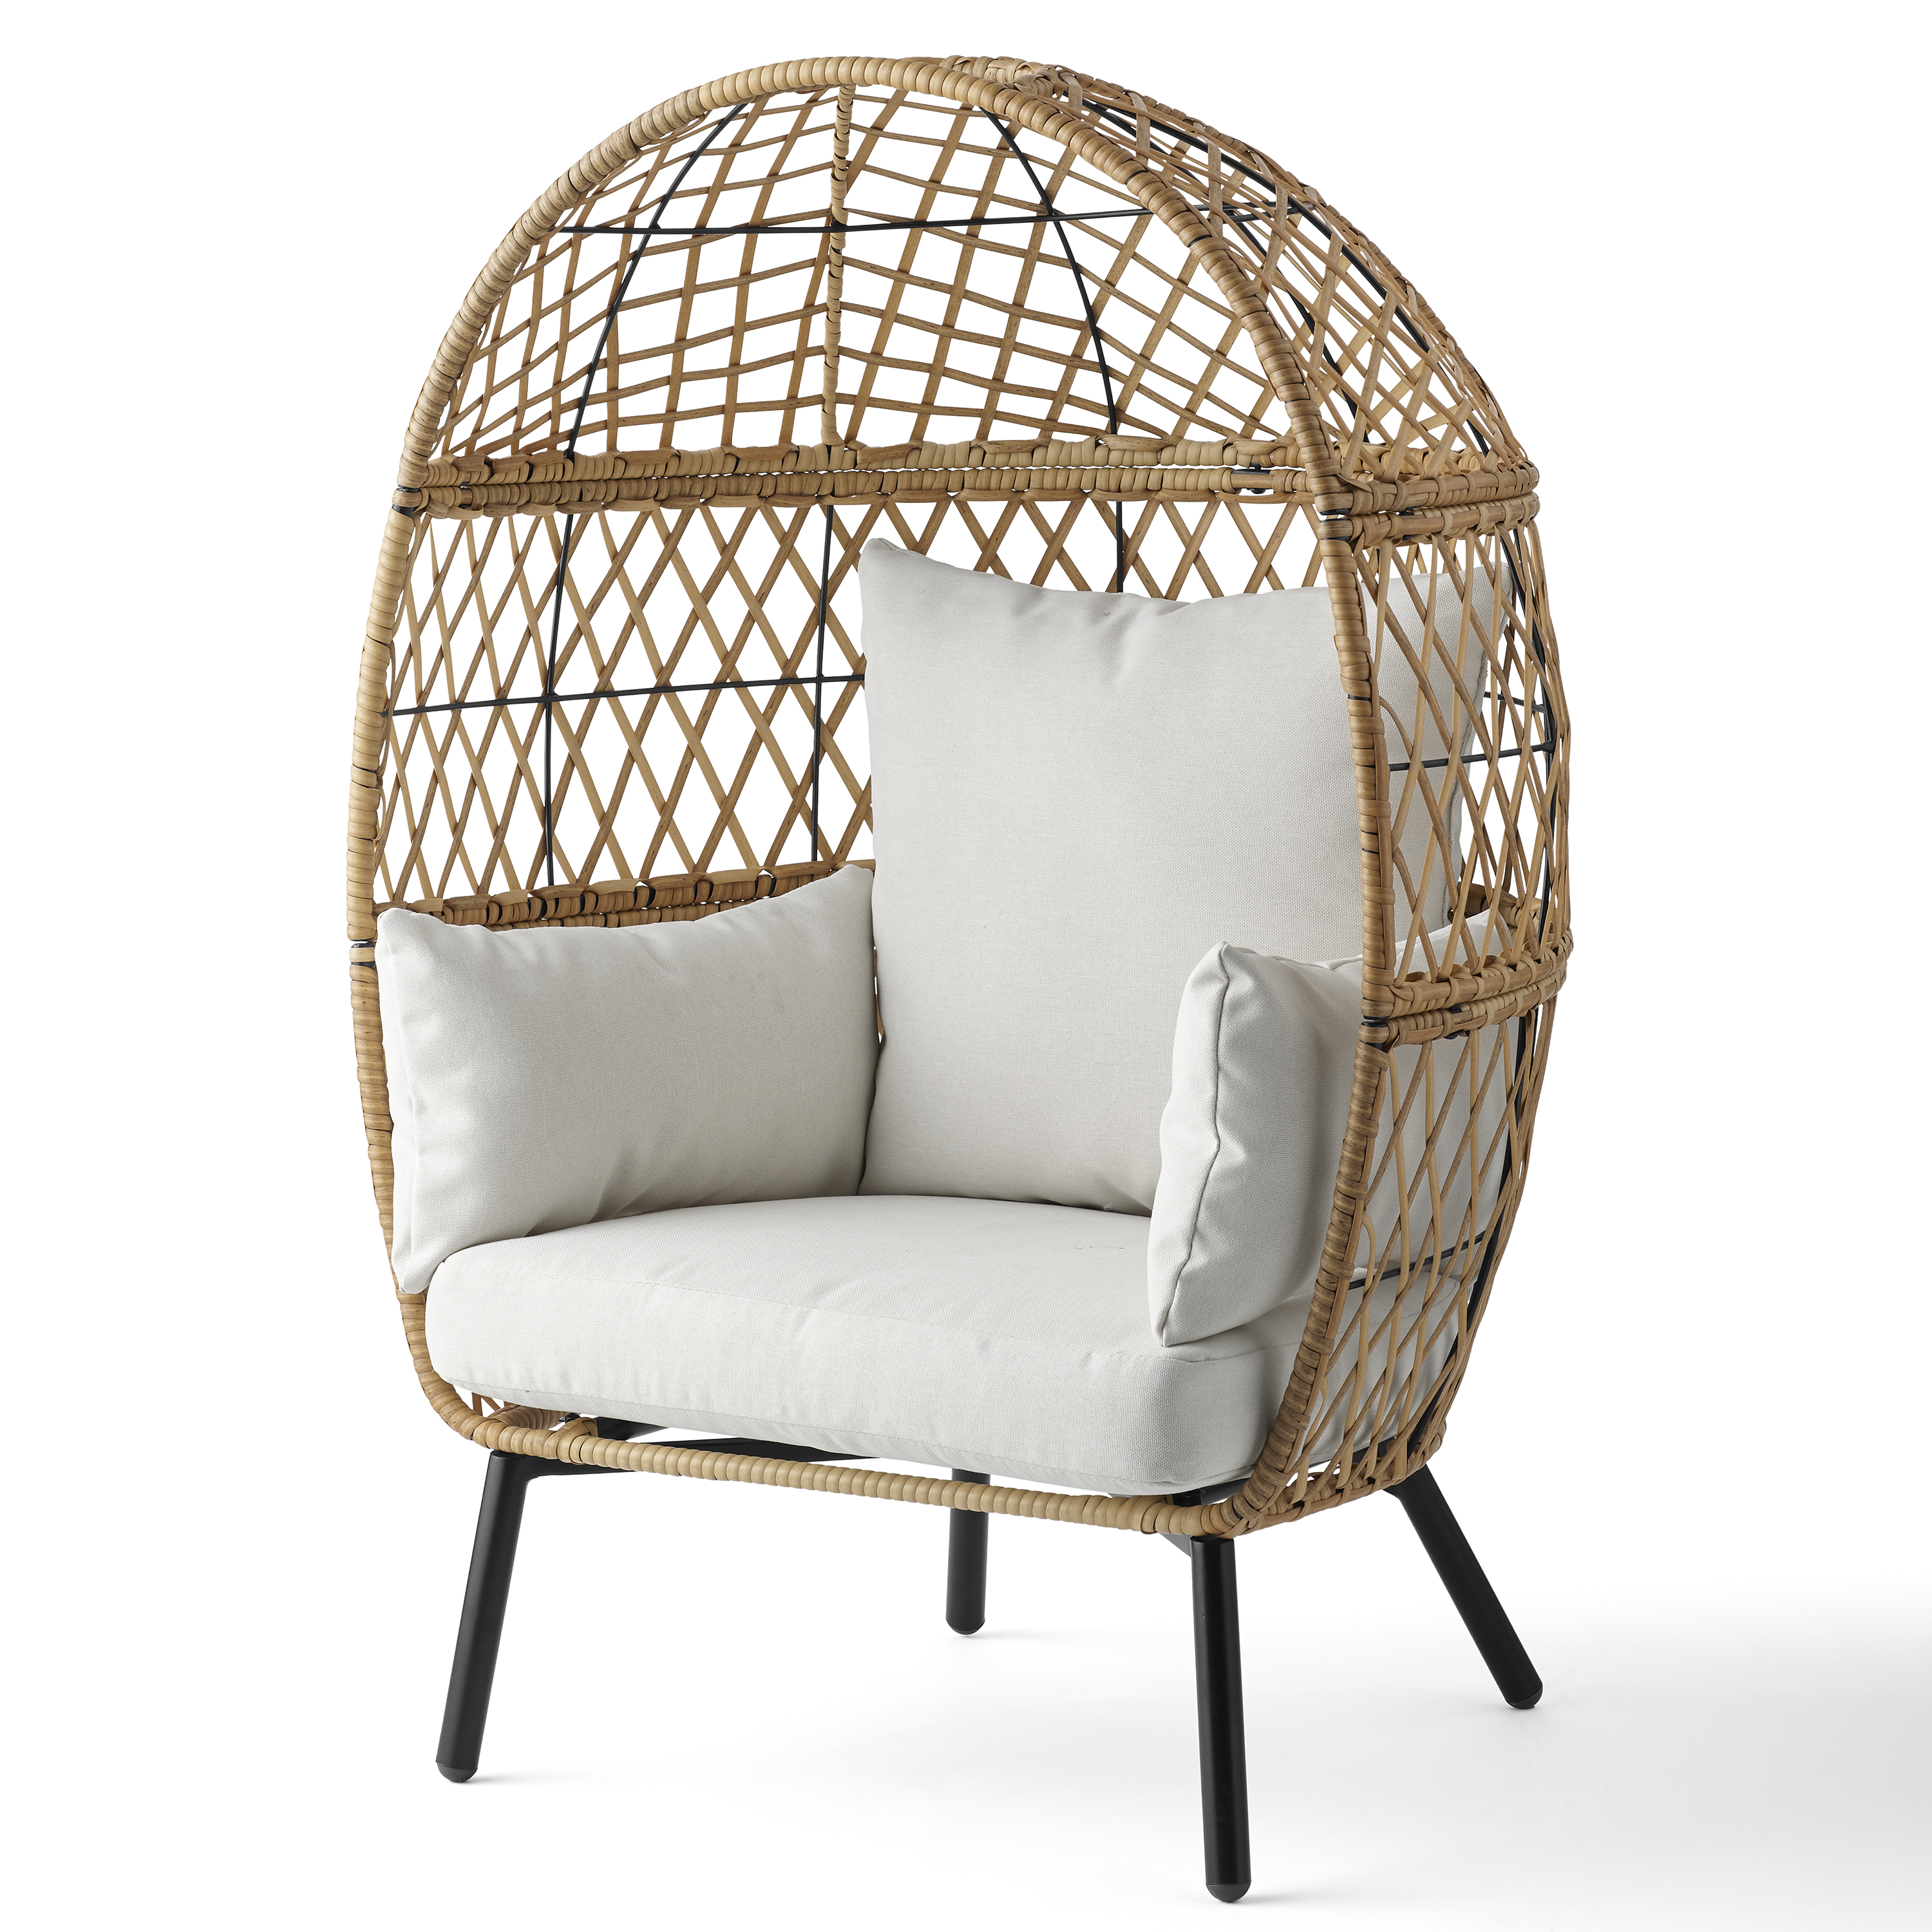 Better Homes & Gardens Kid's Ventura Outdoor Wicker Stationary Egg Chair with Cream Cushions - image 2 of 8